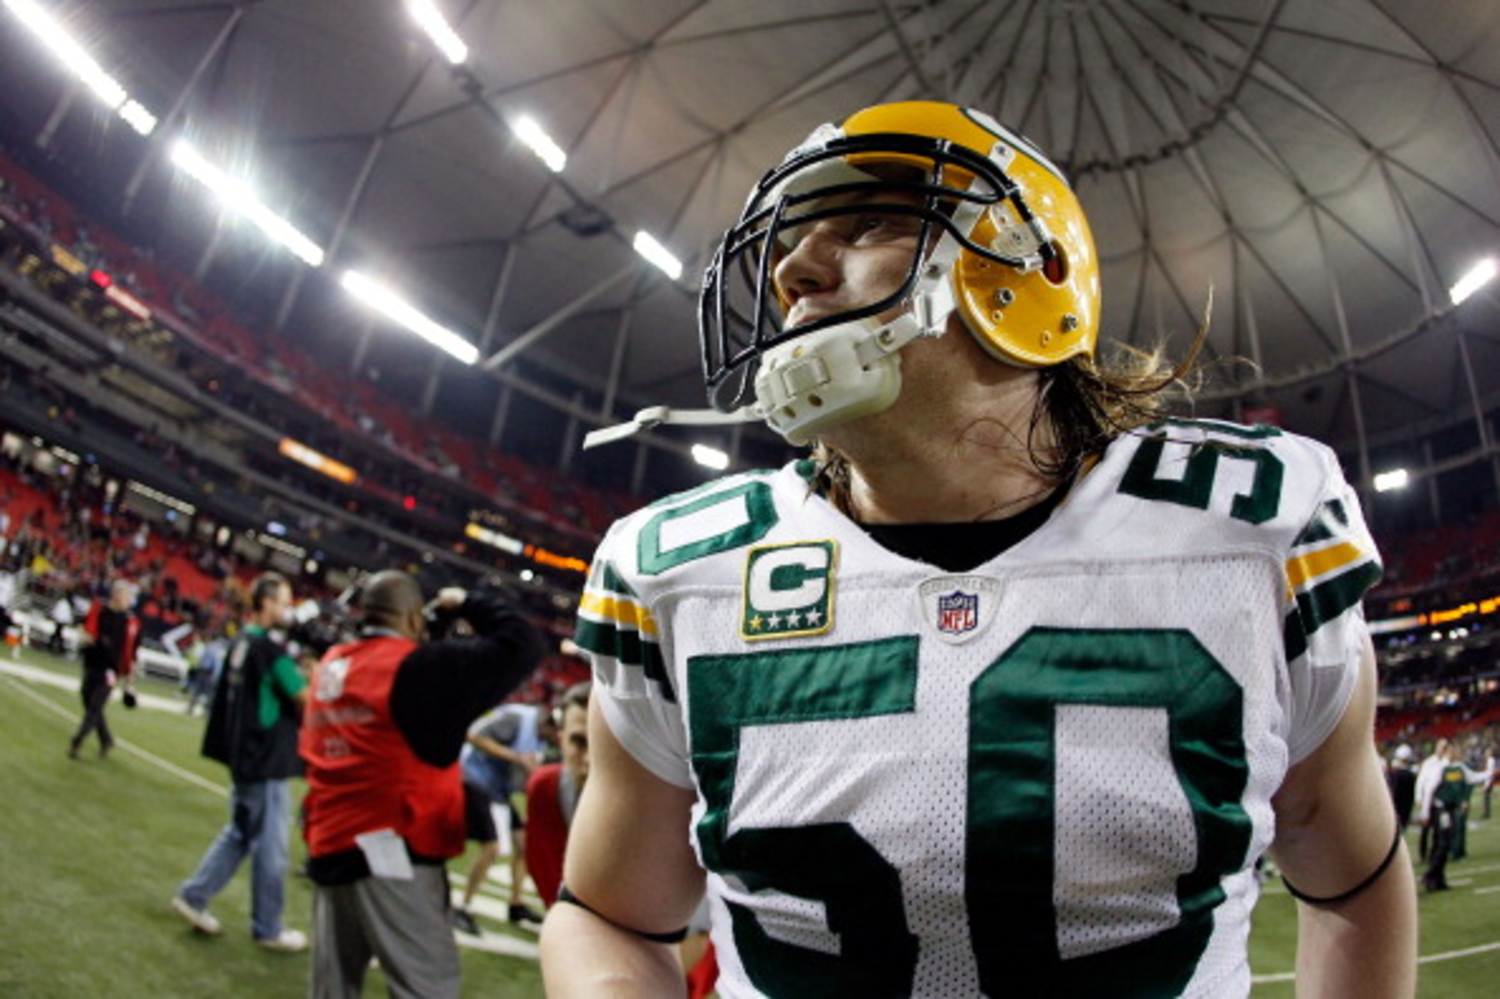 A.J. Hawk was a star in college, but not in the NFL.